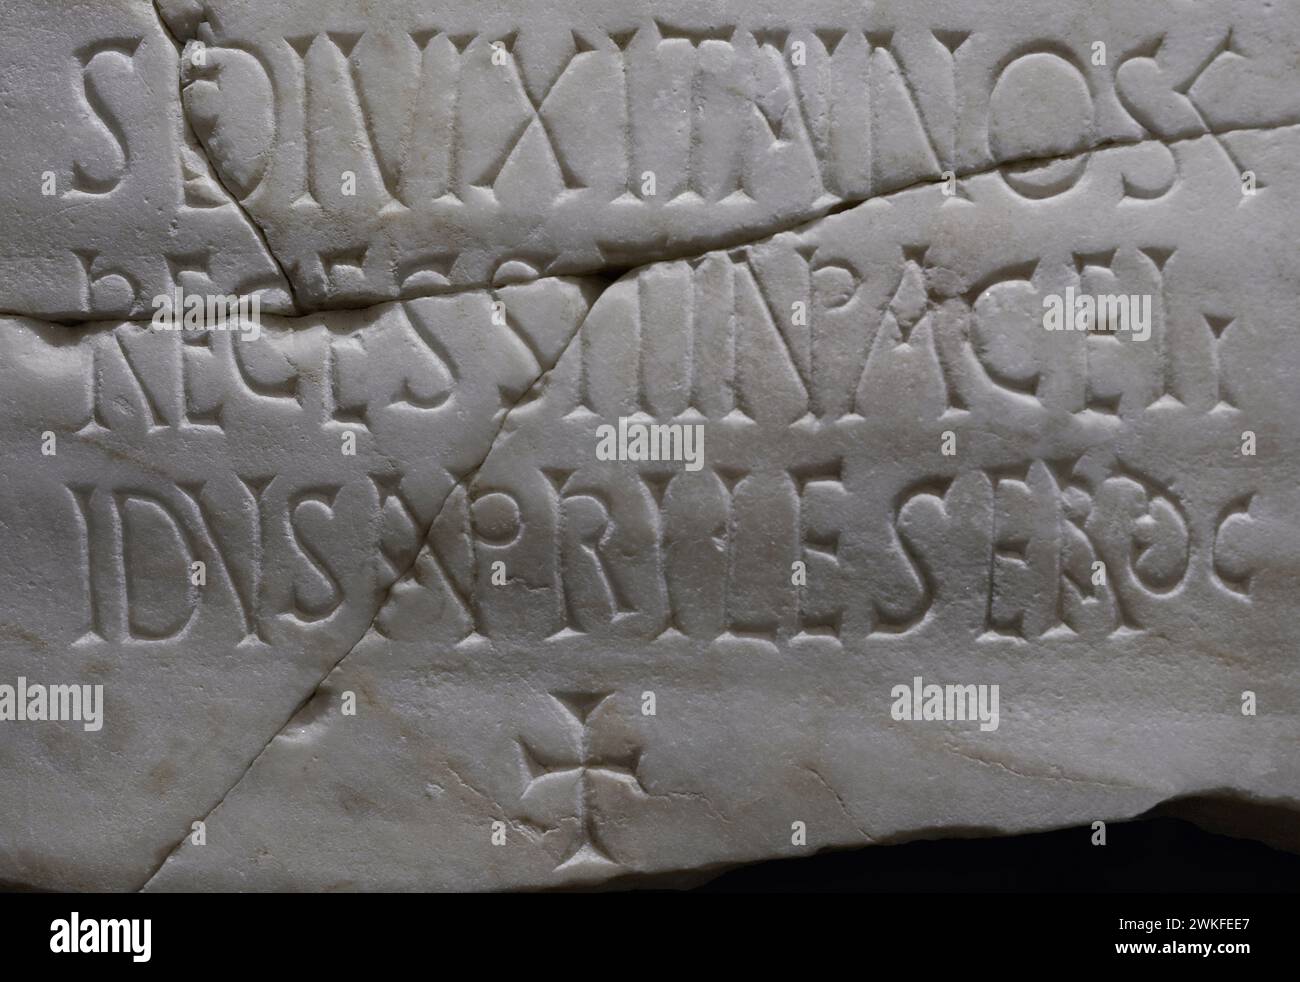 Tombstone of Sagenis. Inscription referring to Sagenis, who died at the age of 50. Text: 'SAGENIS FAMVLV/S DEI VIXIT ANNOS L / RECESSIT IN PACE II / IDVS APRILES ERA DC' (Sagenis, a servant of God, lived for 50 years. He died peacefully on 12th April 600 of the Spanish Era). Detail. Marble. 562 AD. Provenance unknown. Museum of Visigoth Councils and Culture. Toledo, Castile-La Mancha, Spain. Stock Photo